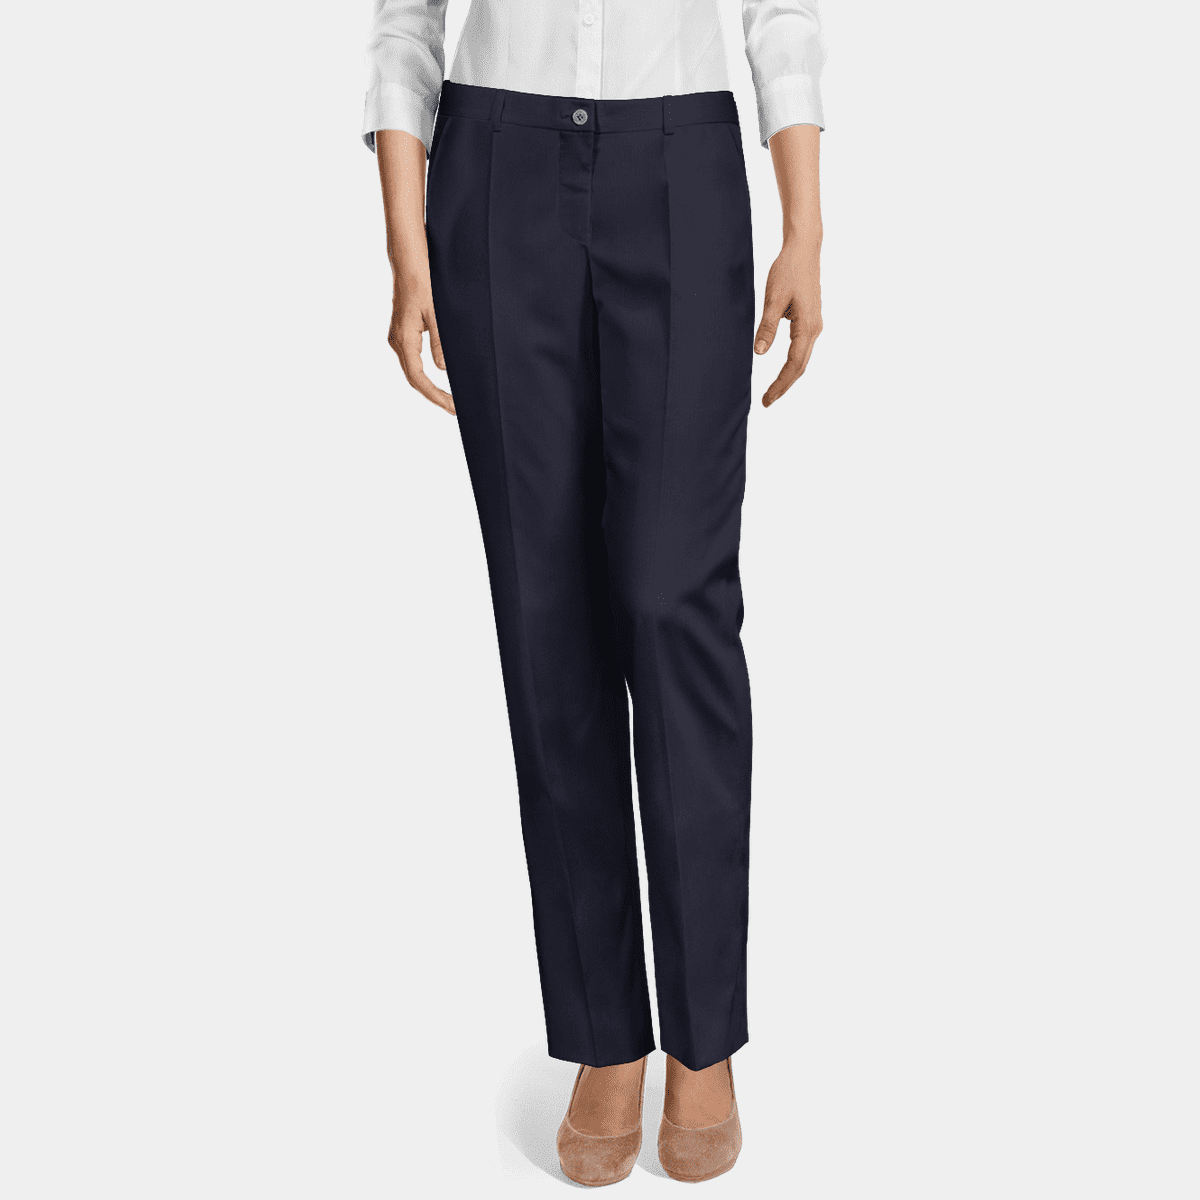 Faded Terracotta Cotton Linen Pull On Pant - Women's High Waisted Pants